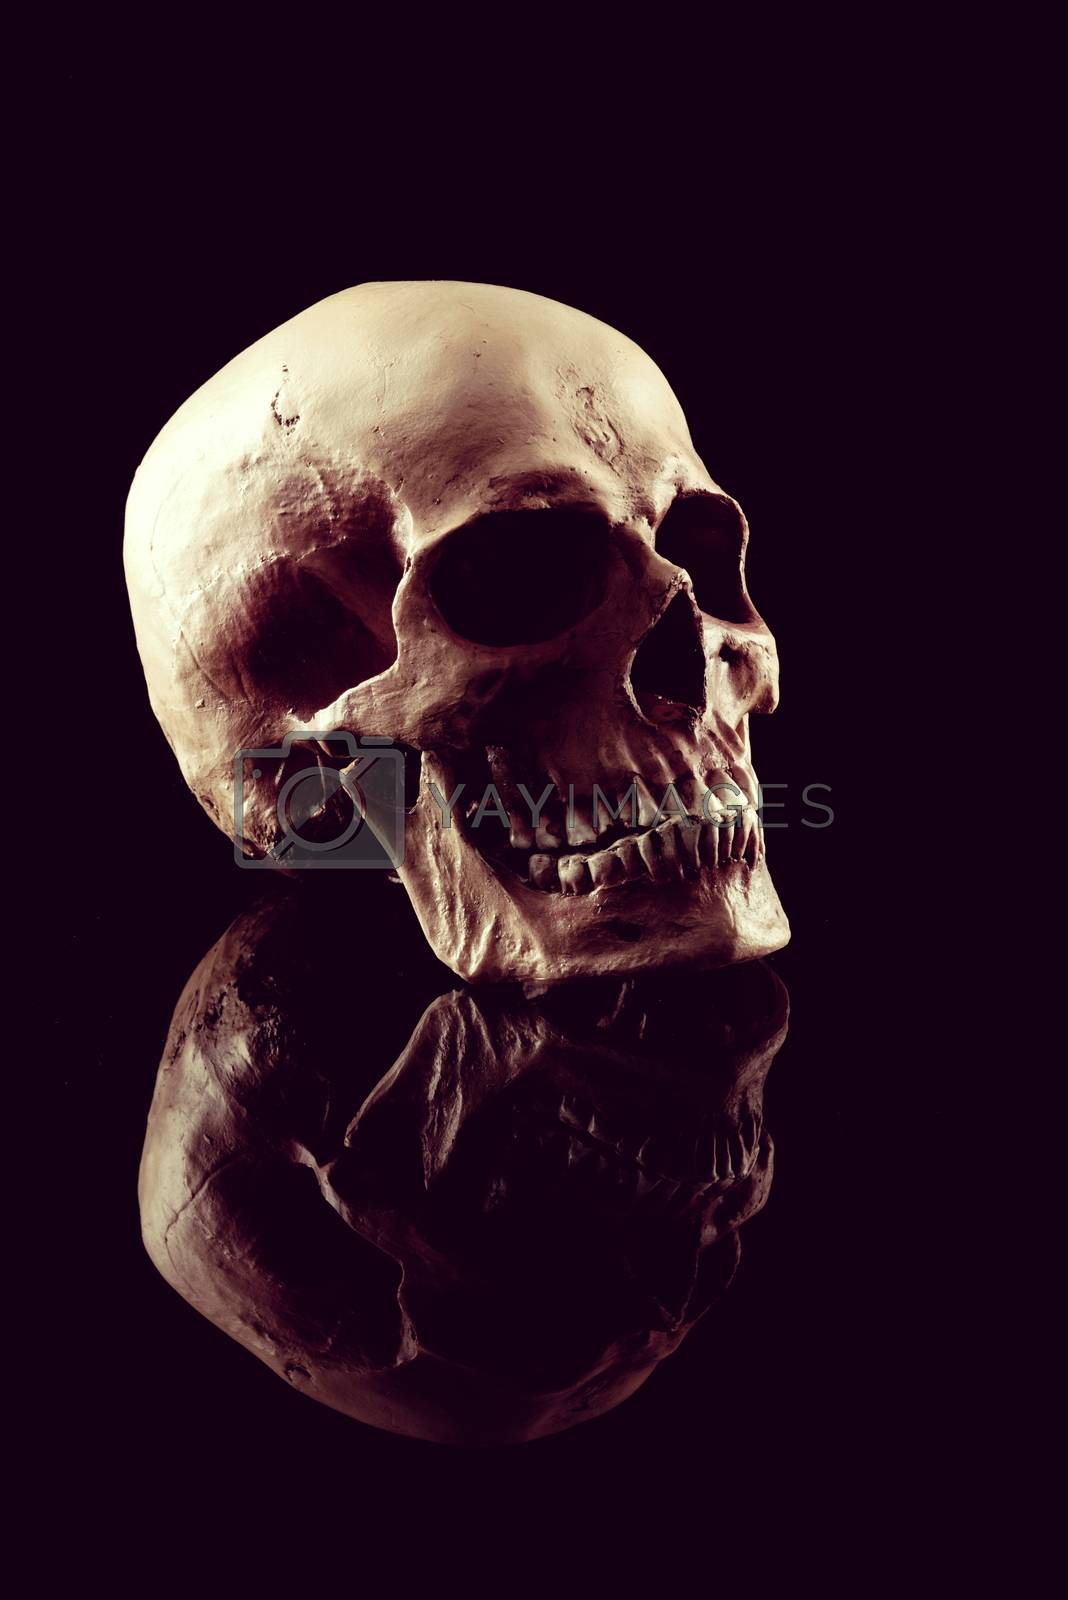 Royalty free image of Human skull by stokkete